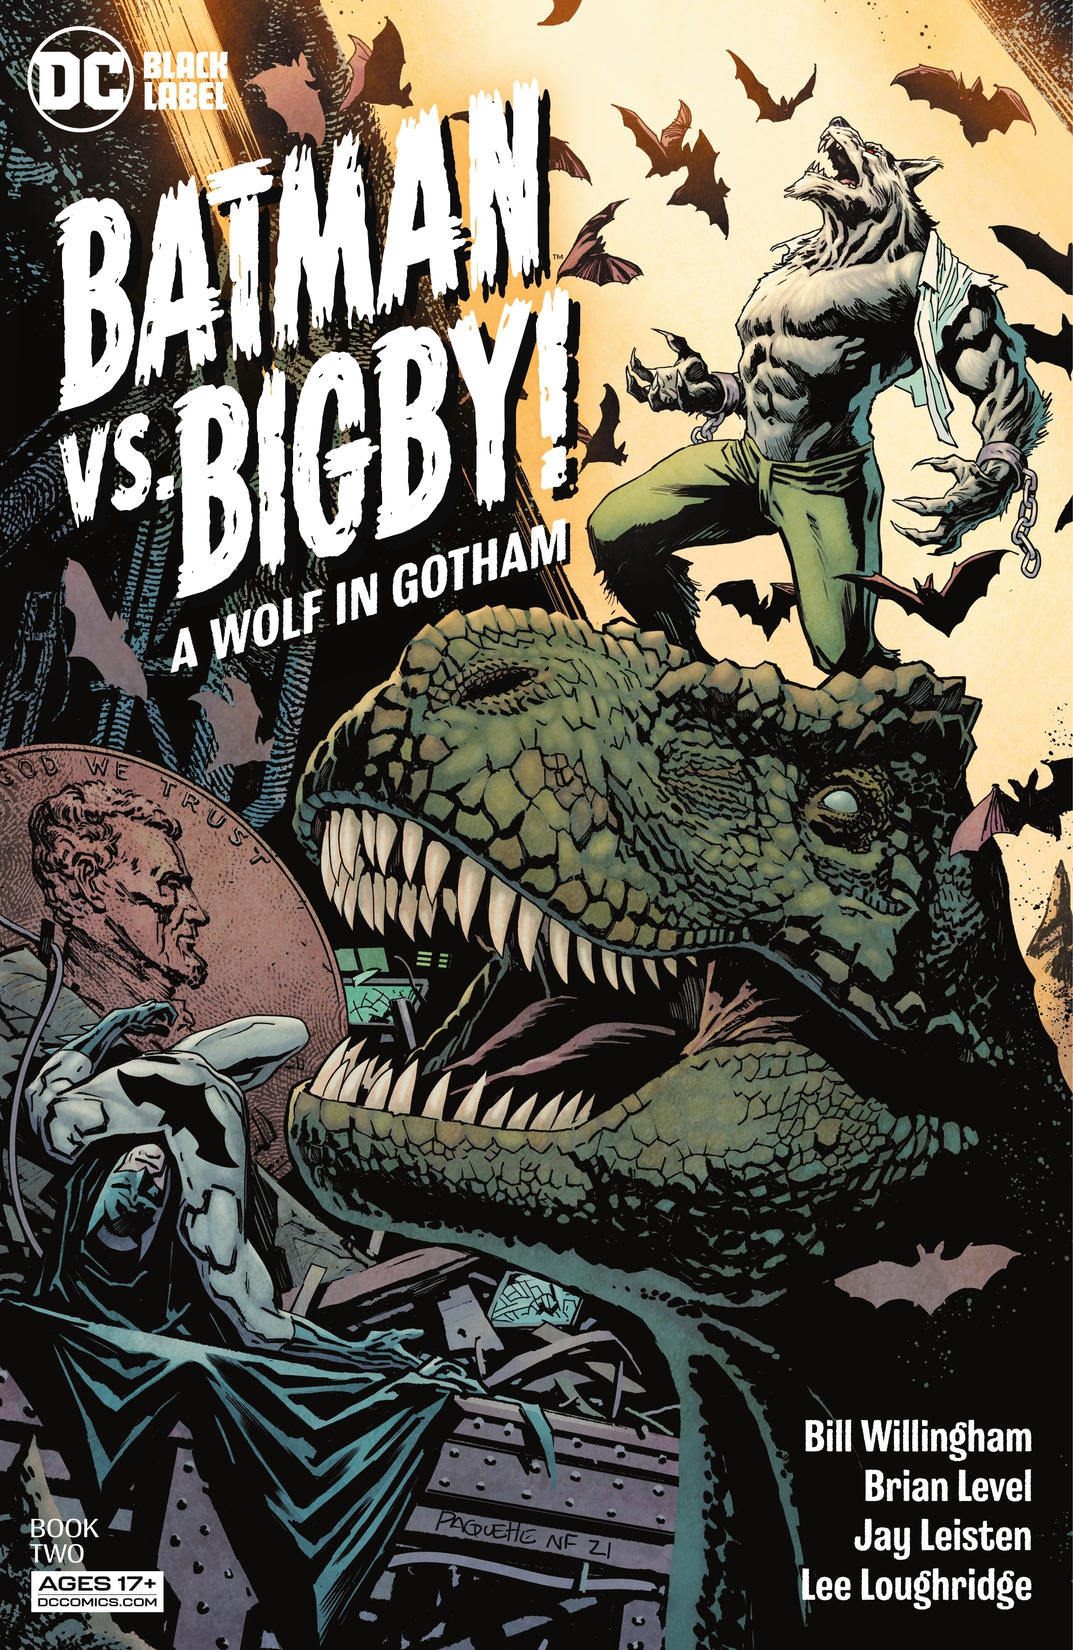 Batman Vs. Bigby! A Wolf In Gotham #2 preview images